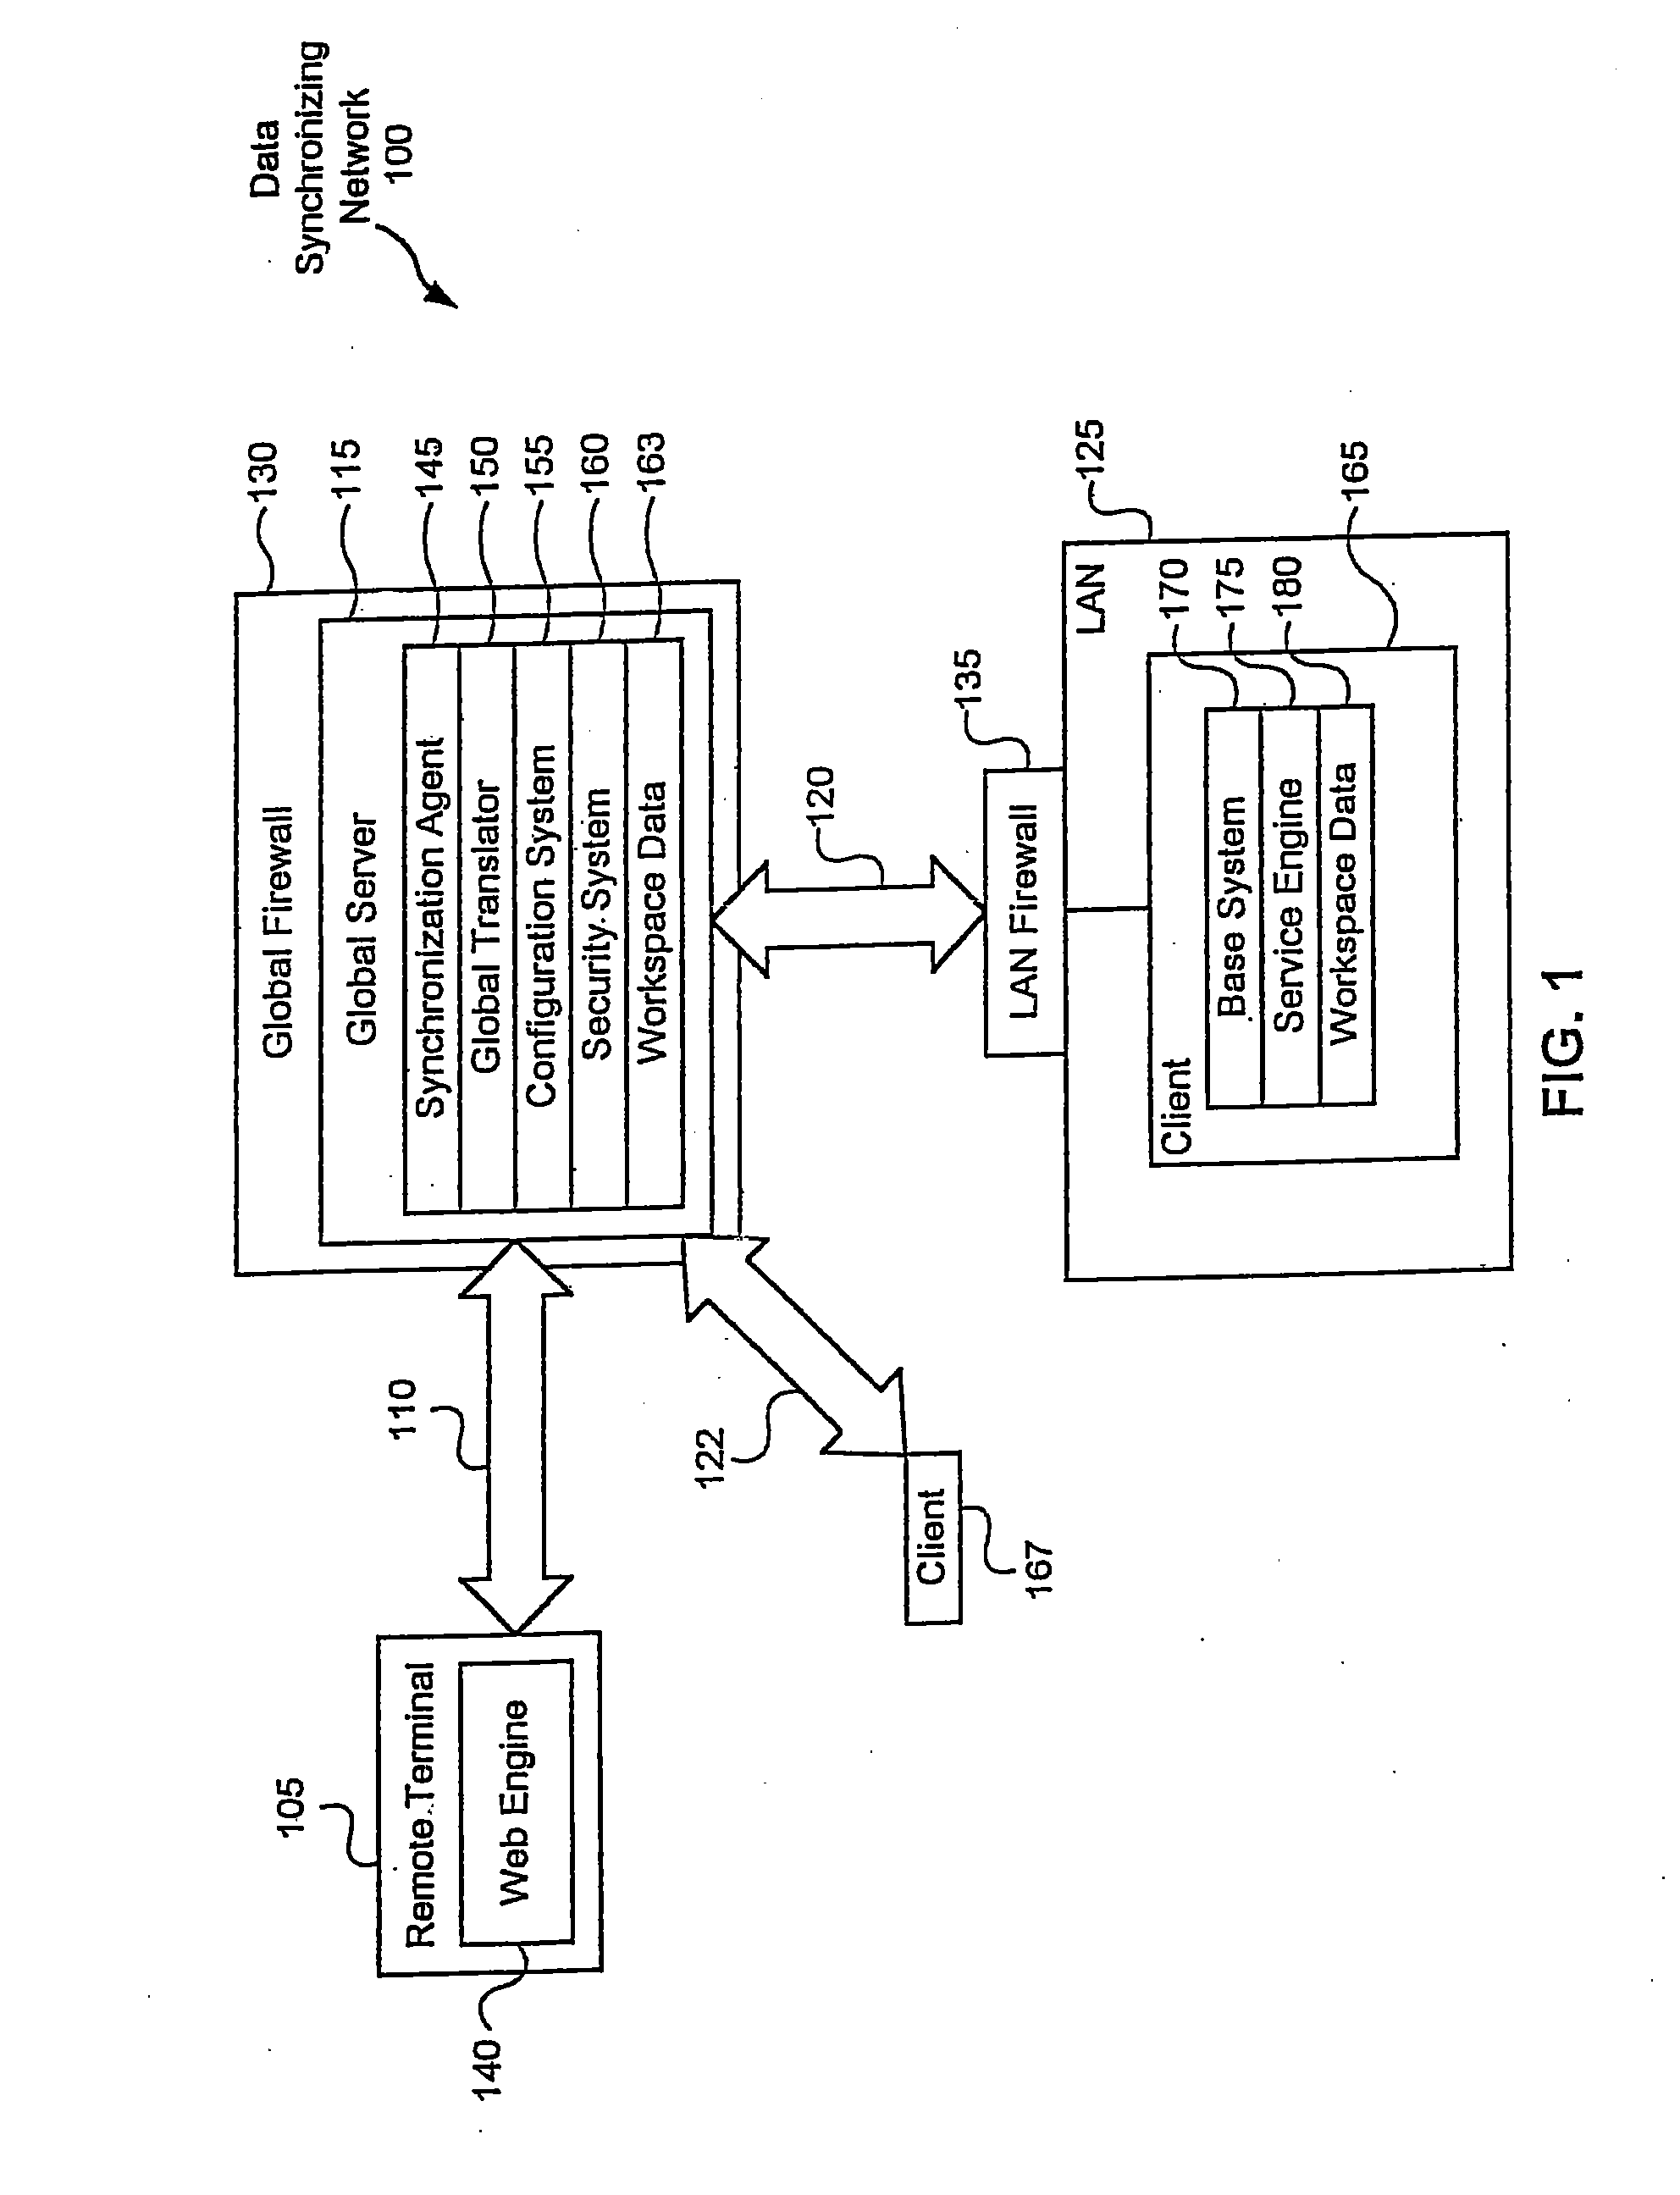 System and method for globally and securely accessing unified information in a computer network